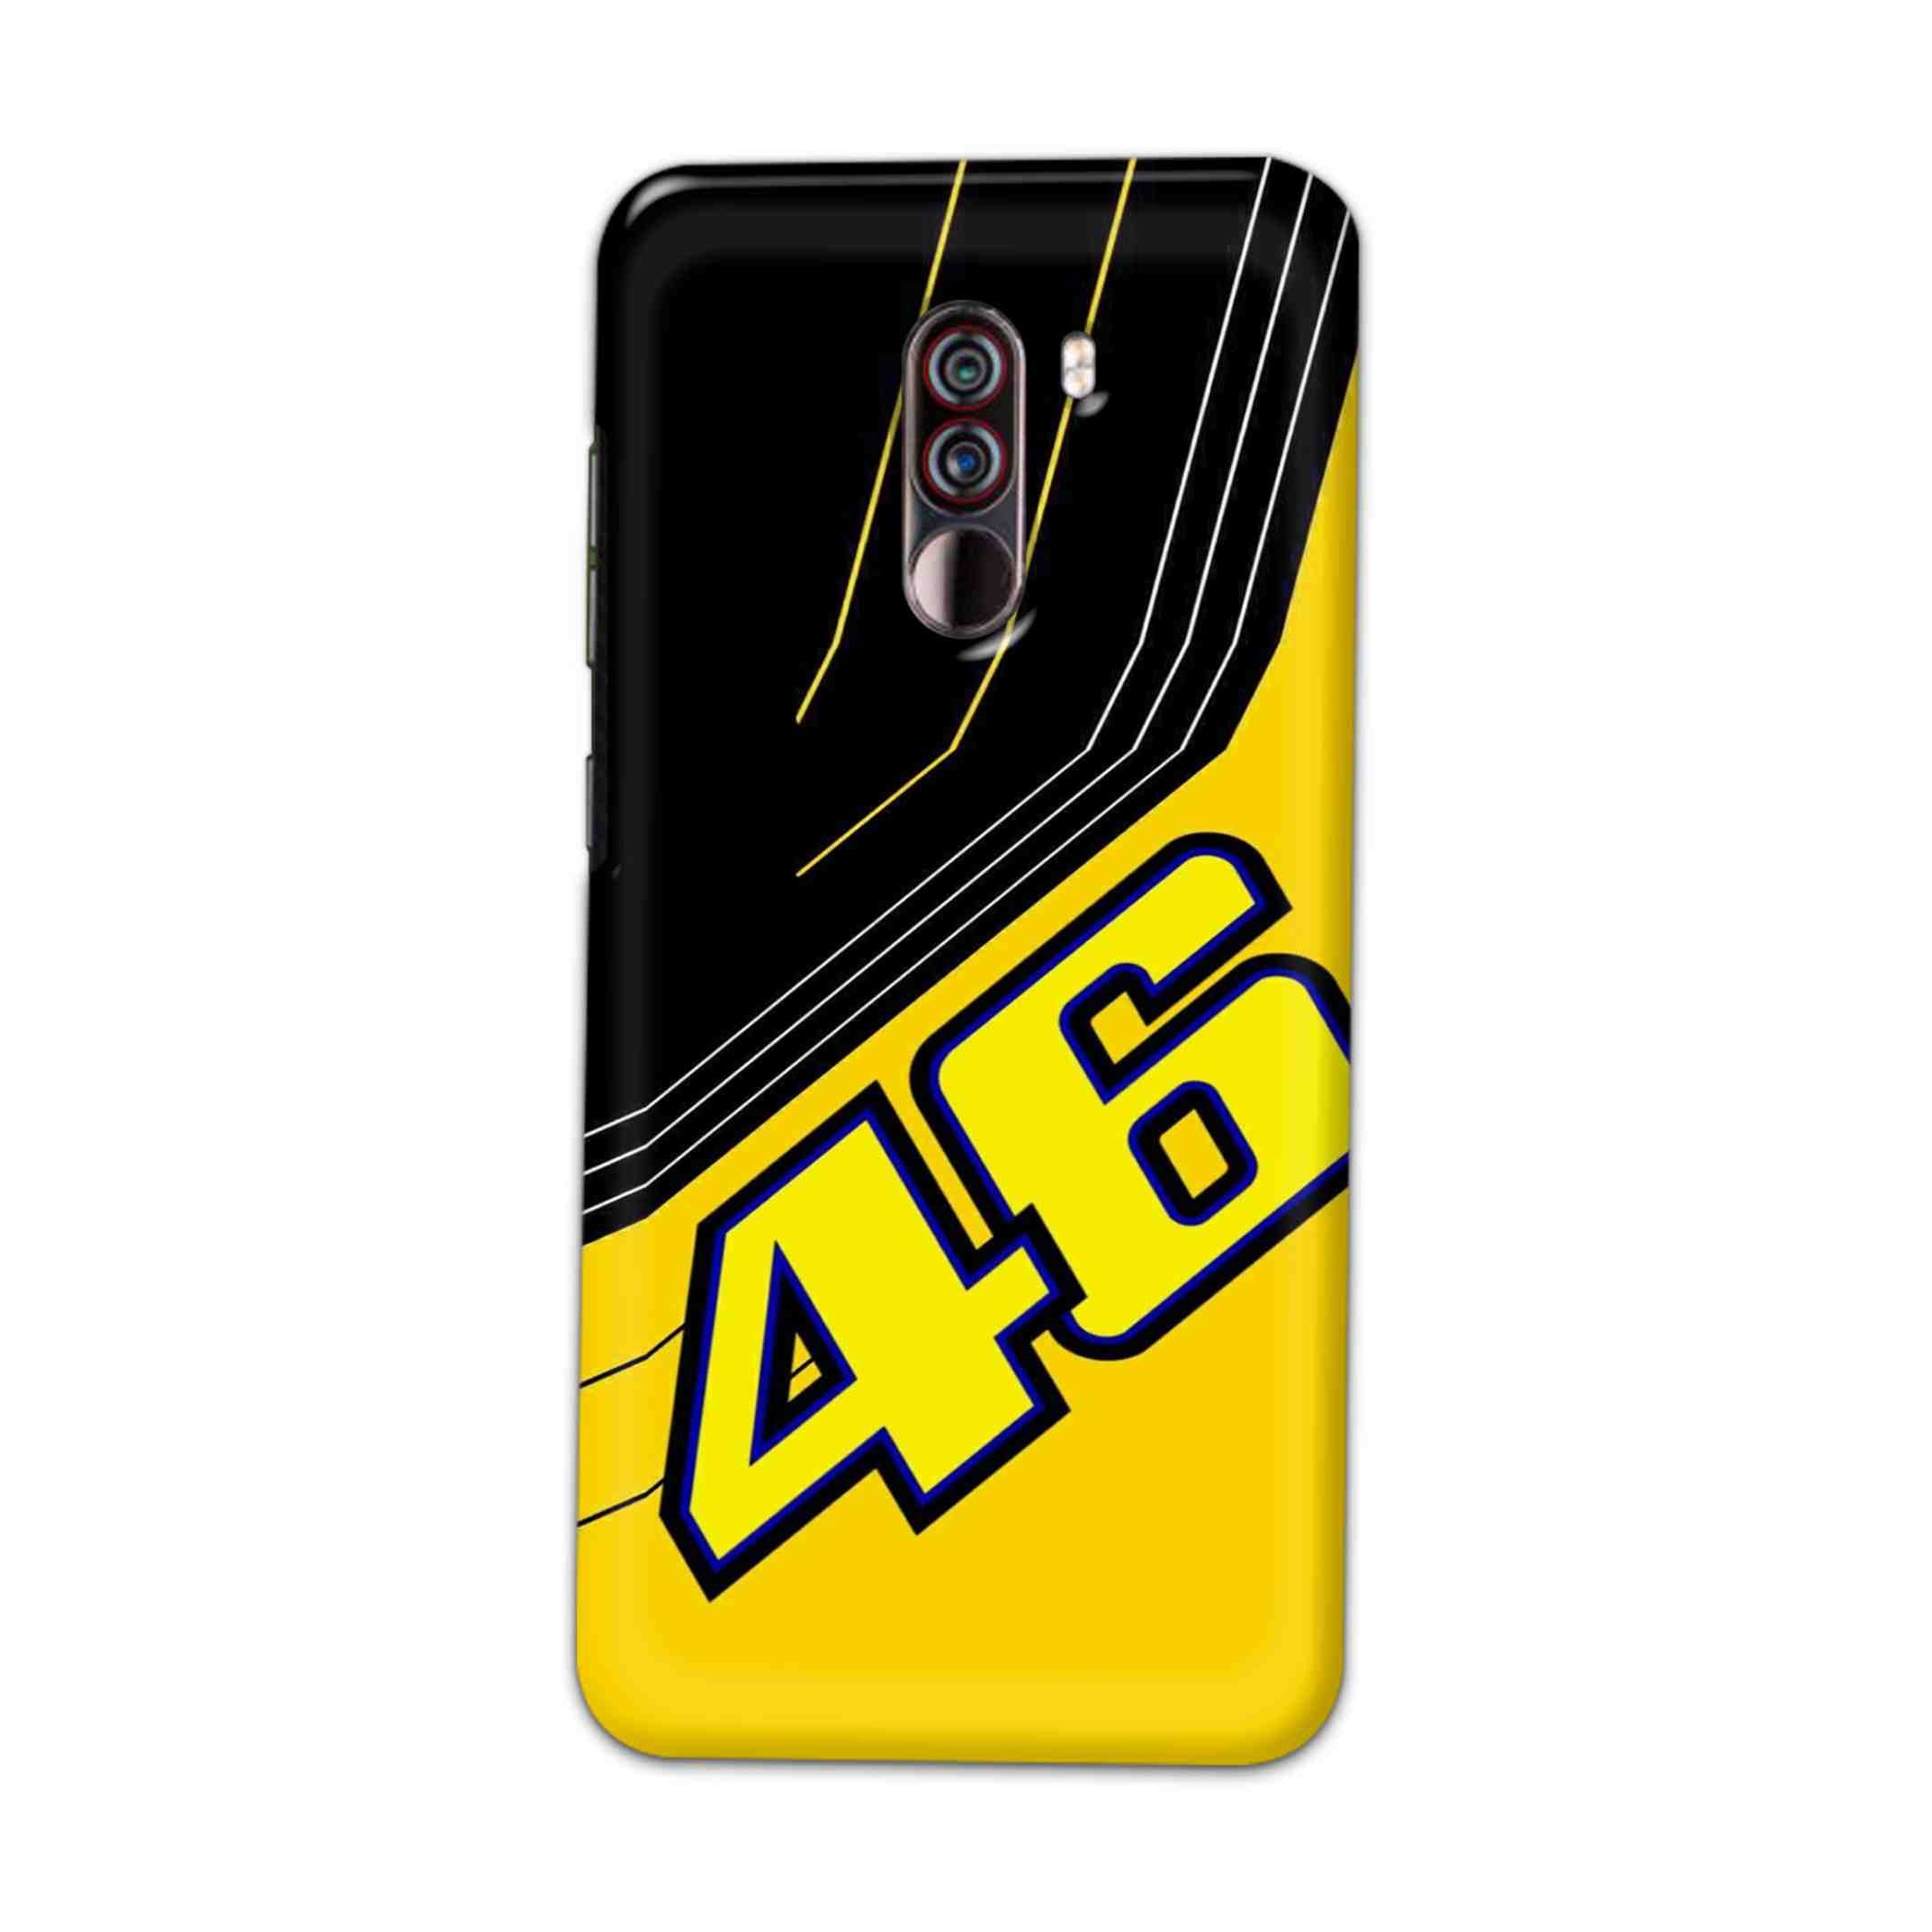 Buy 46 Hard Back Mobile Phone Case Cover For Xiaomi Pocophone F1 Online